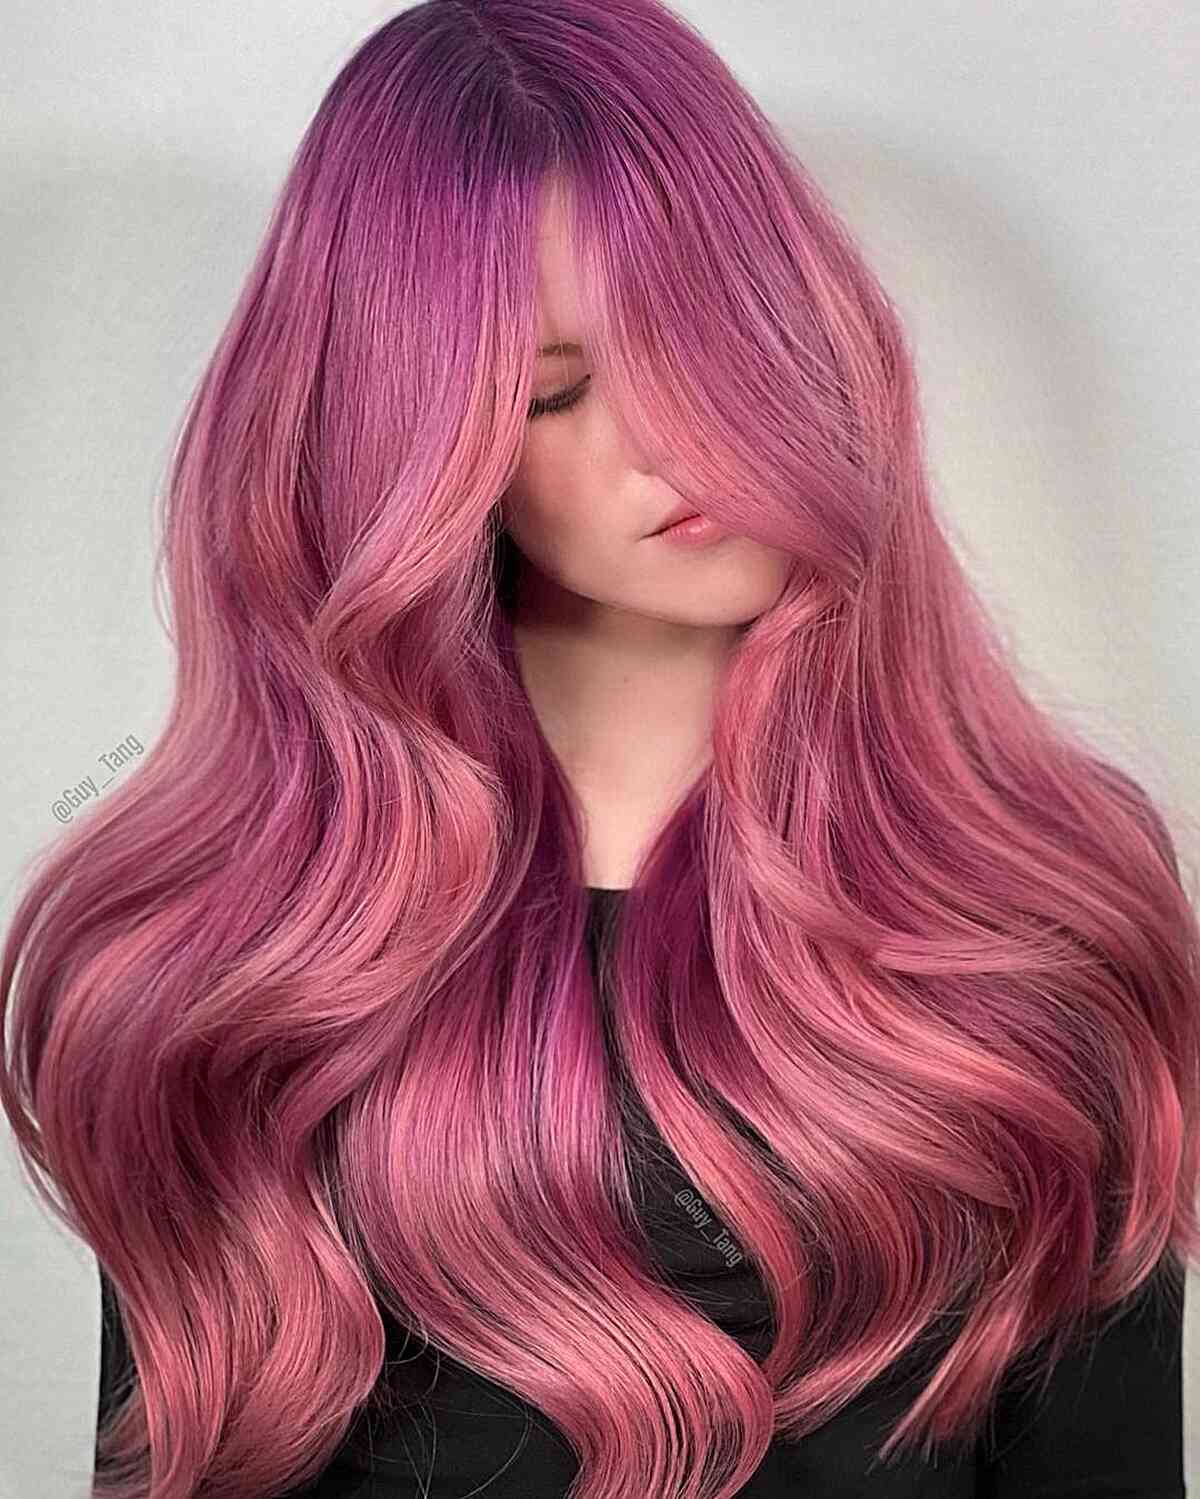 Vibrant Pastel Pink Hair Color for long thick hair with waves